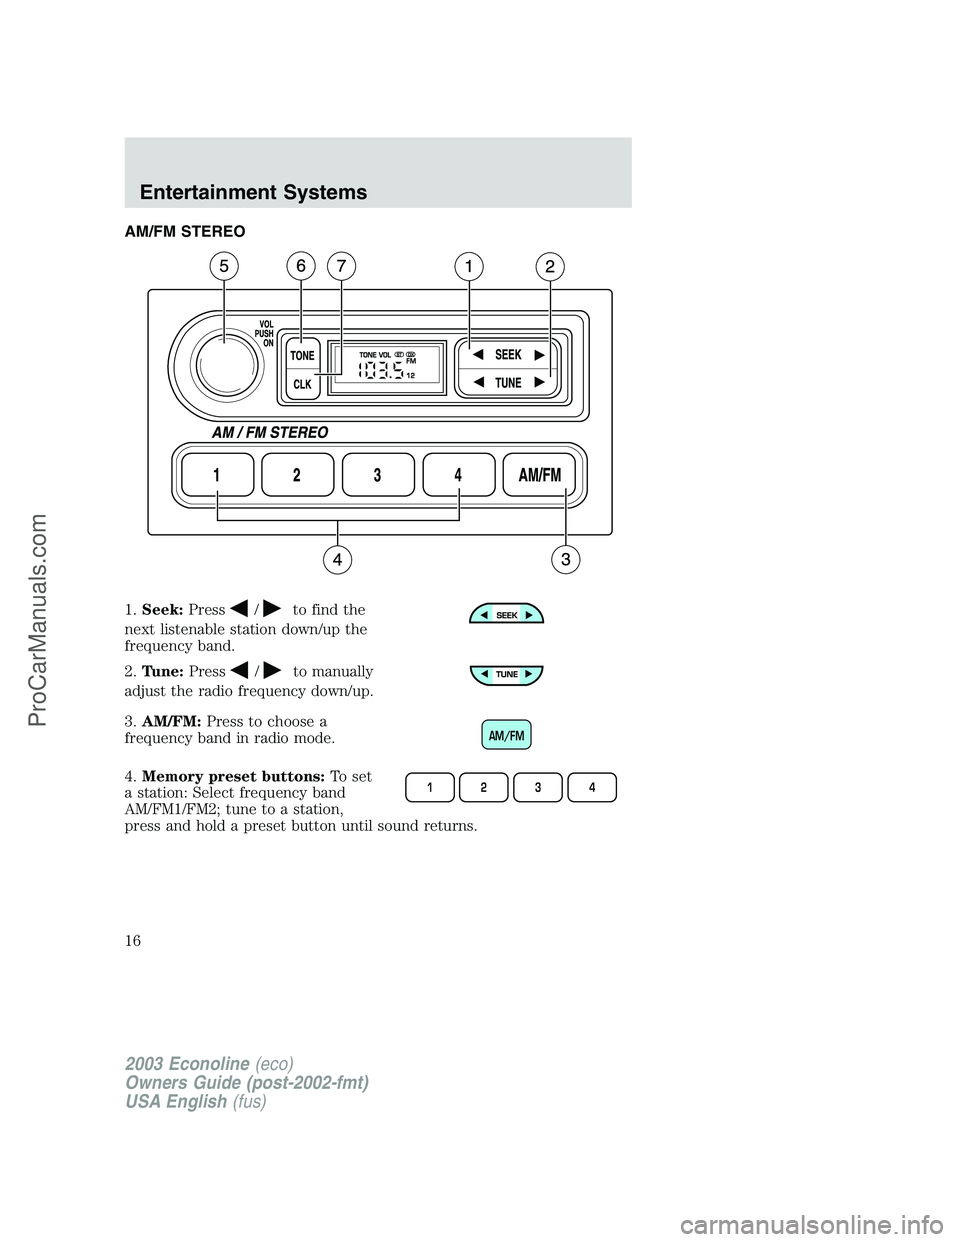 FORD E-150 2003  Owners Manual AM/FM STEREO
1.Seek:Press
/to find the
next listenable station down/up the
frequency band.
2.Tune:Press
/to manually
adjust the radio frequency down/up.
3.AM/FM:Press to choose a
frequency band in rad